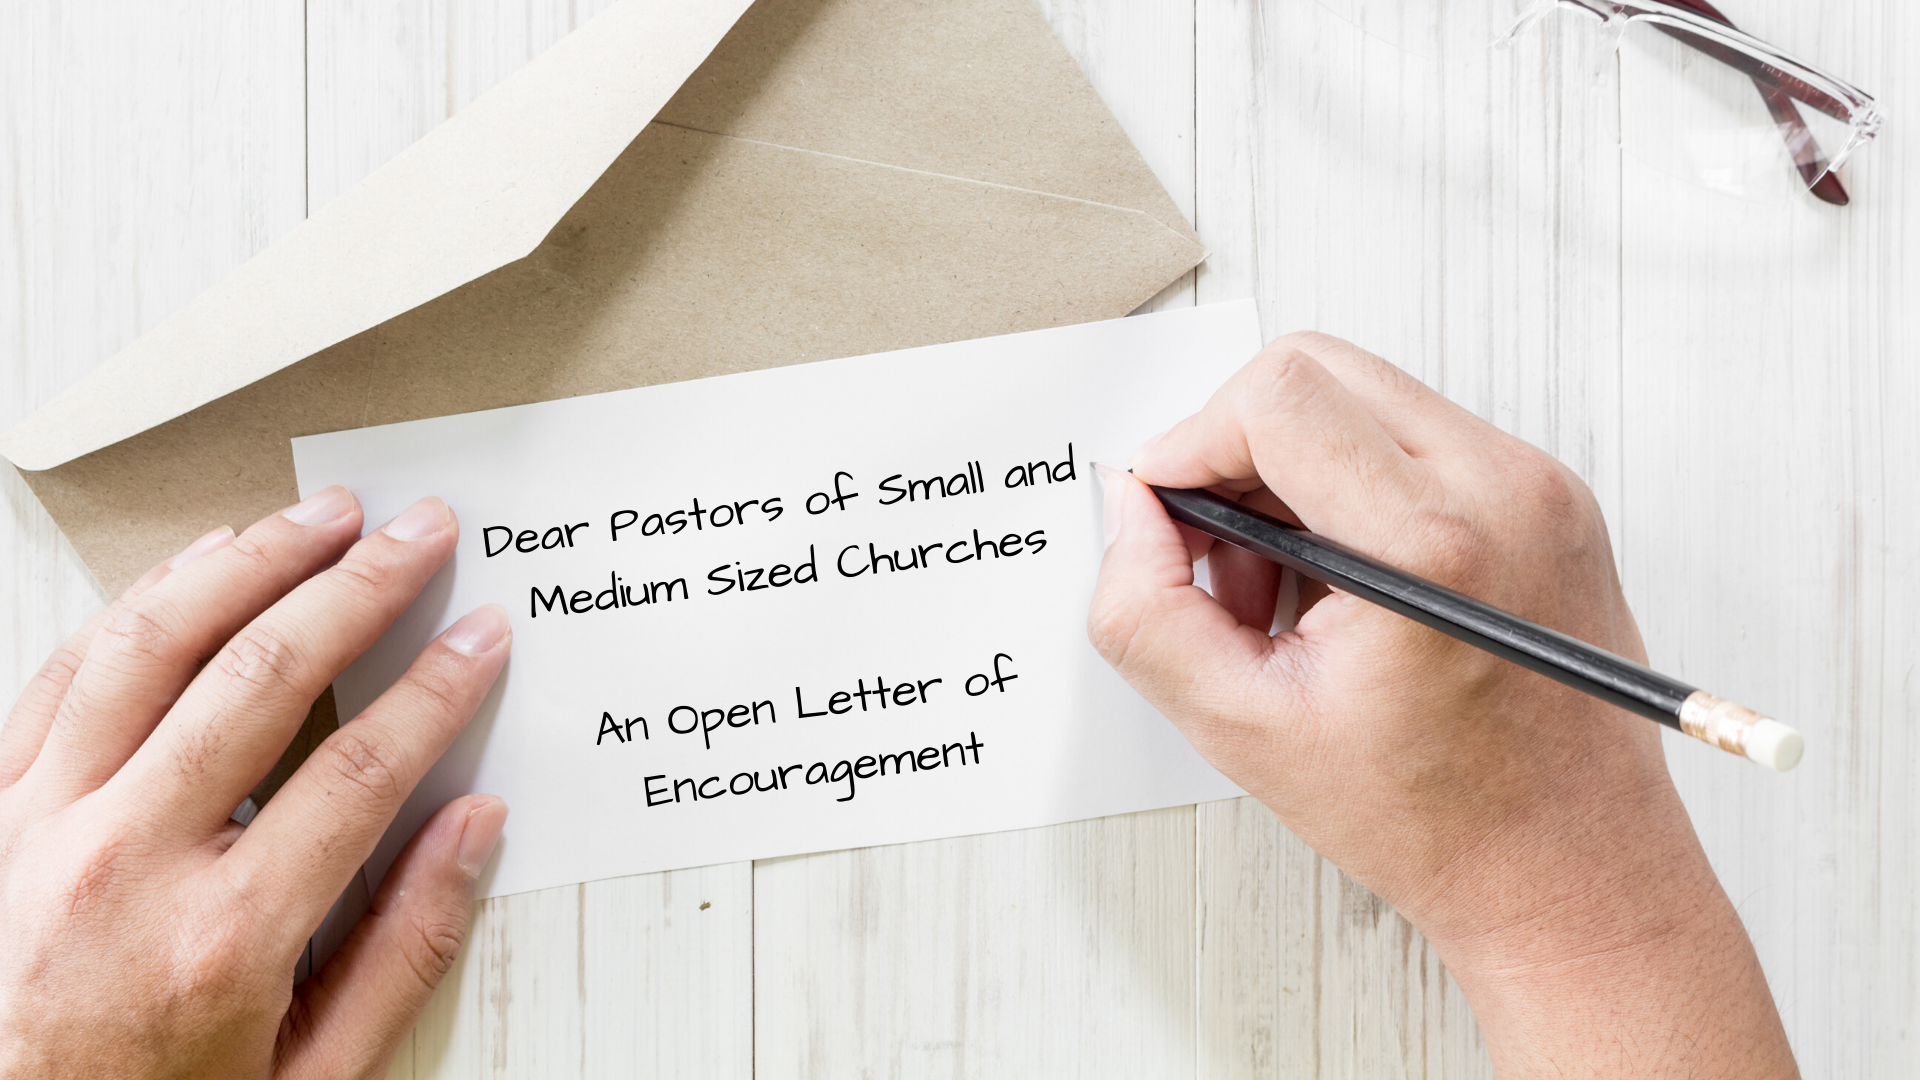 An Open Letter of Encouragement to Pastors of Small and Medium-Sized Churches